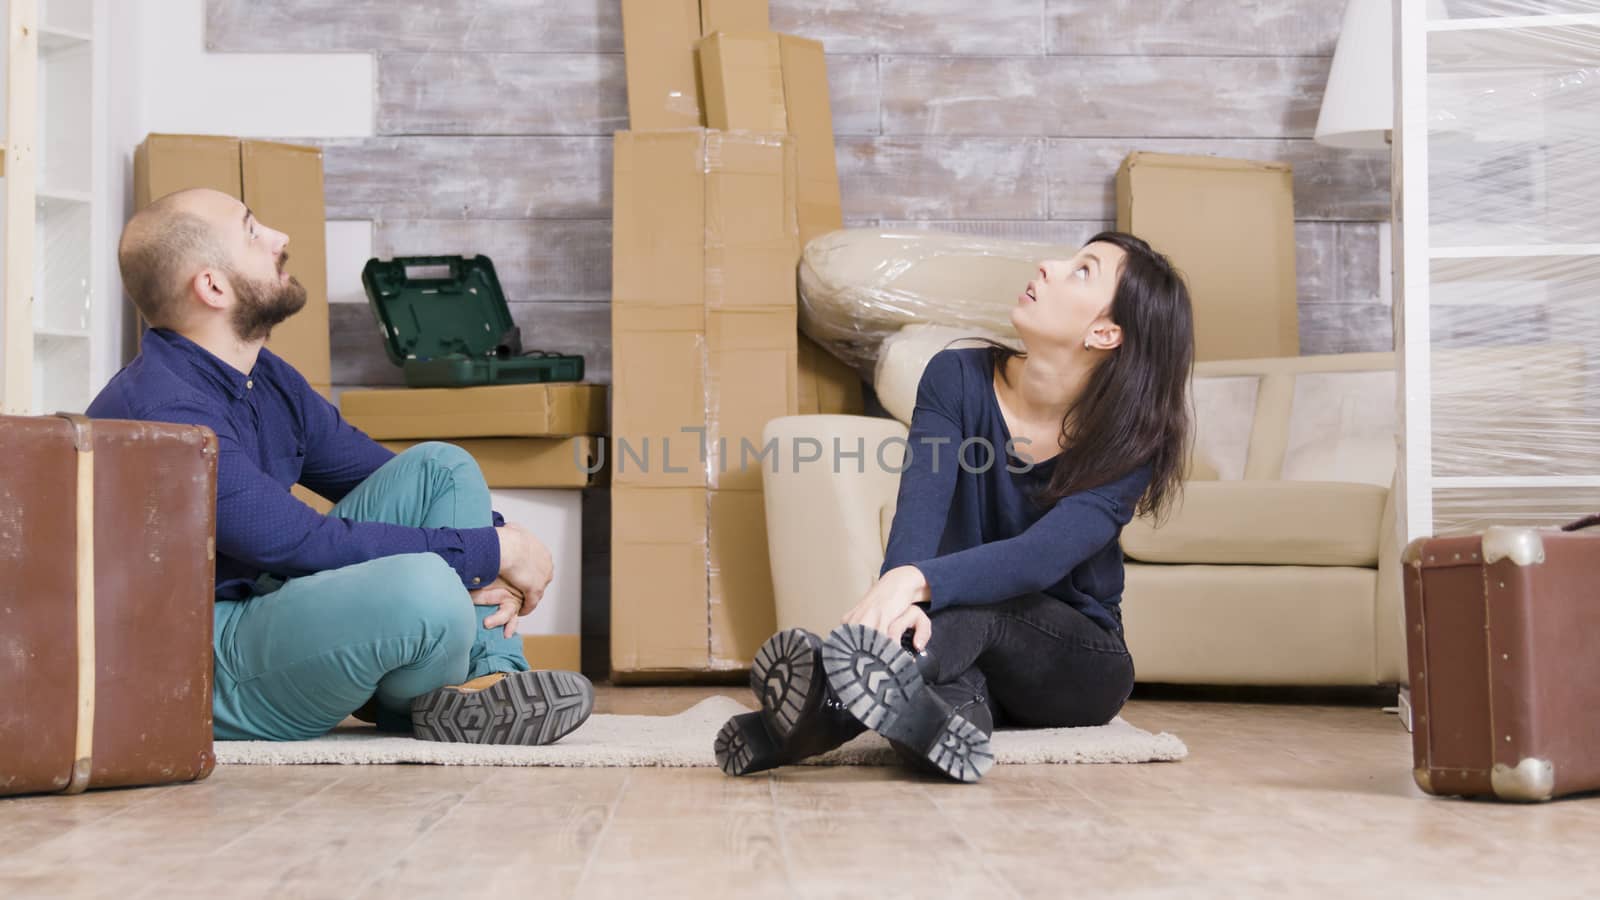 Couple sitting on carpet in their new apartment with suitcases in front of them. Cardboard boxes in the background.